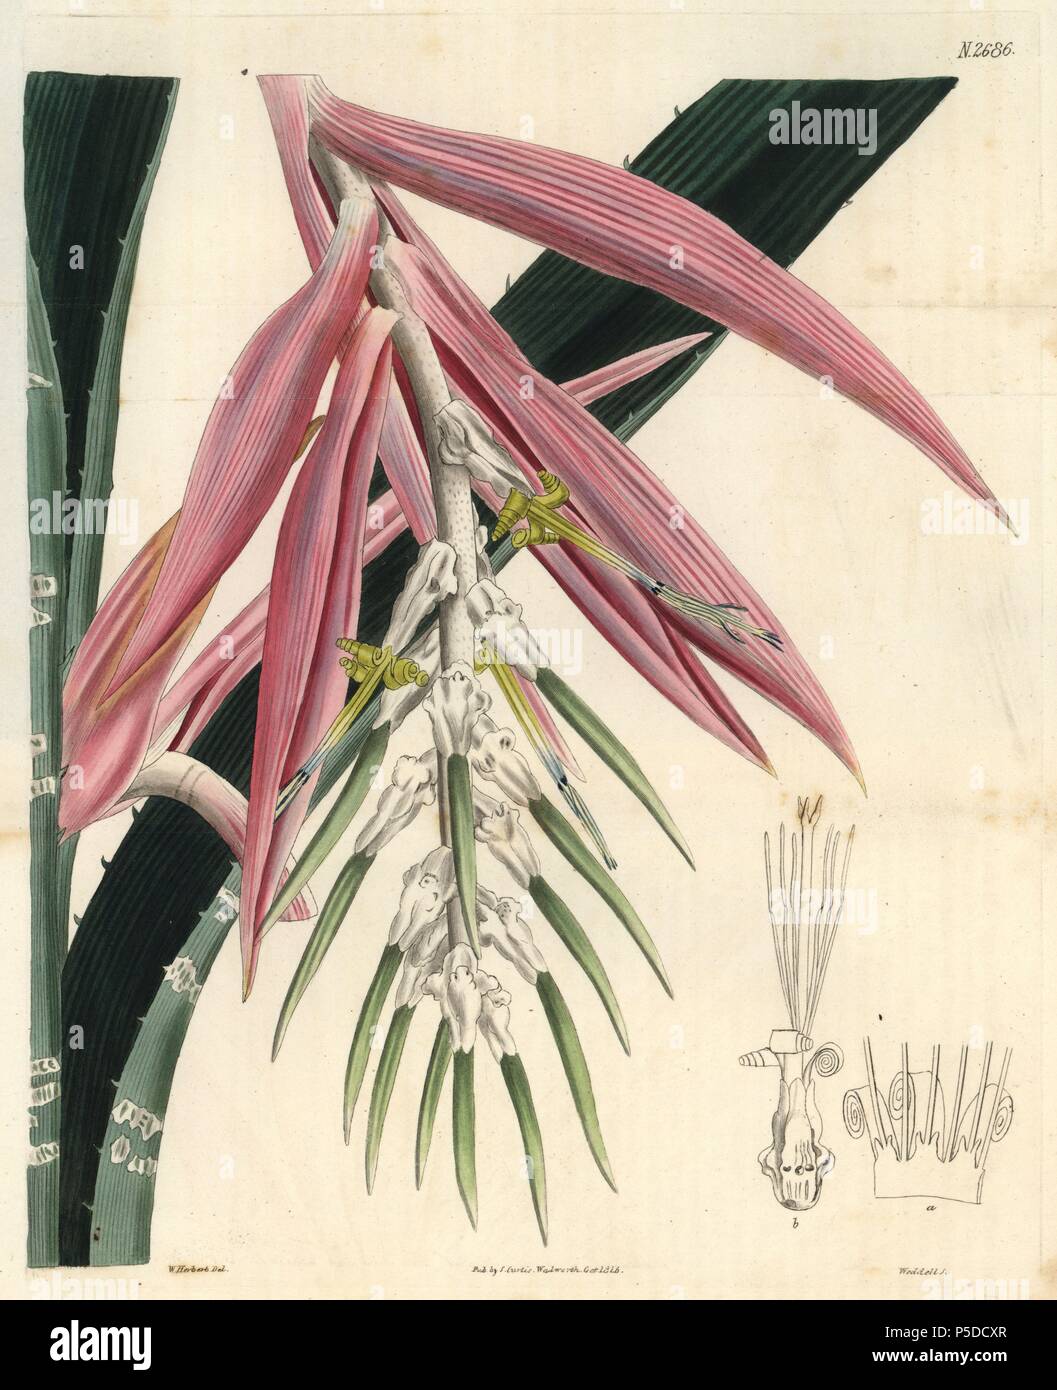 White-barred bromelia. Bromelia zebrina. Pink bromelia with white-barred leaves, a parasitic plant from South America.. Illustration by William Herbert, engraved by Weddell. Handcolored copperplate engraving from Samuel Curtis's 'The Curtis Botanical Magazine' 1826. Herbert (1778-1847) was a clergyman, classical scholar, poet and botanist. A keen gardener, he was an expert on bulbous plants and developed many new varieties.. . Samuel Curtis, cousin and son-in-law to William Curtis, took over the Botanical Magazine in 1826. Samuel re-named it 'The Curtis Botanical Magazine' and enlisted the hel Stock Photo